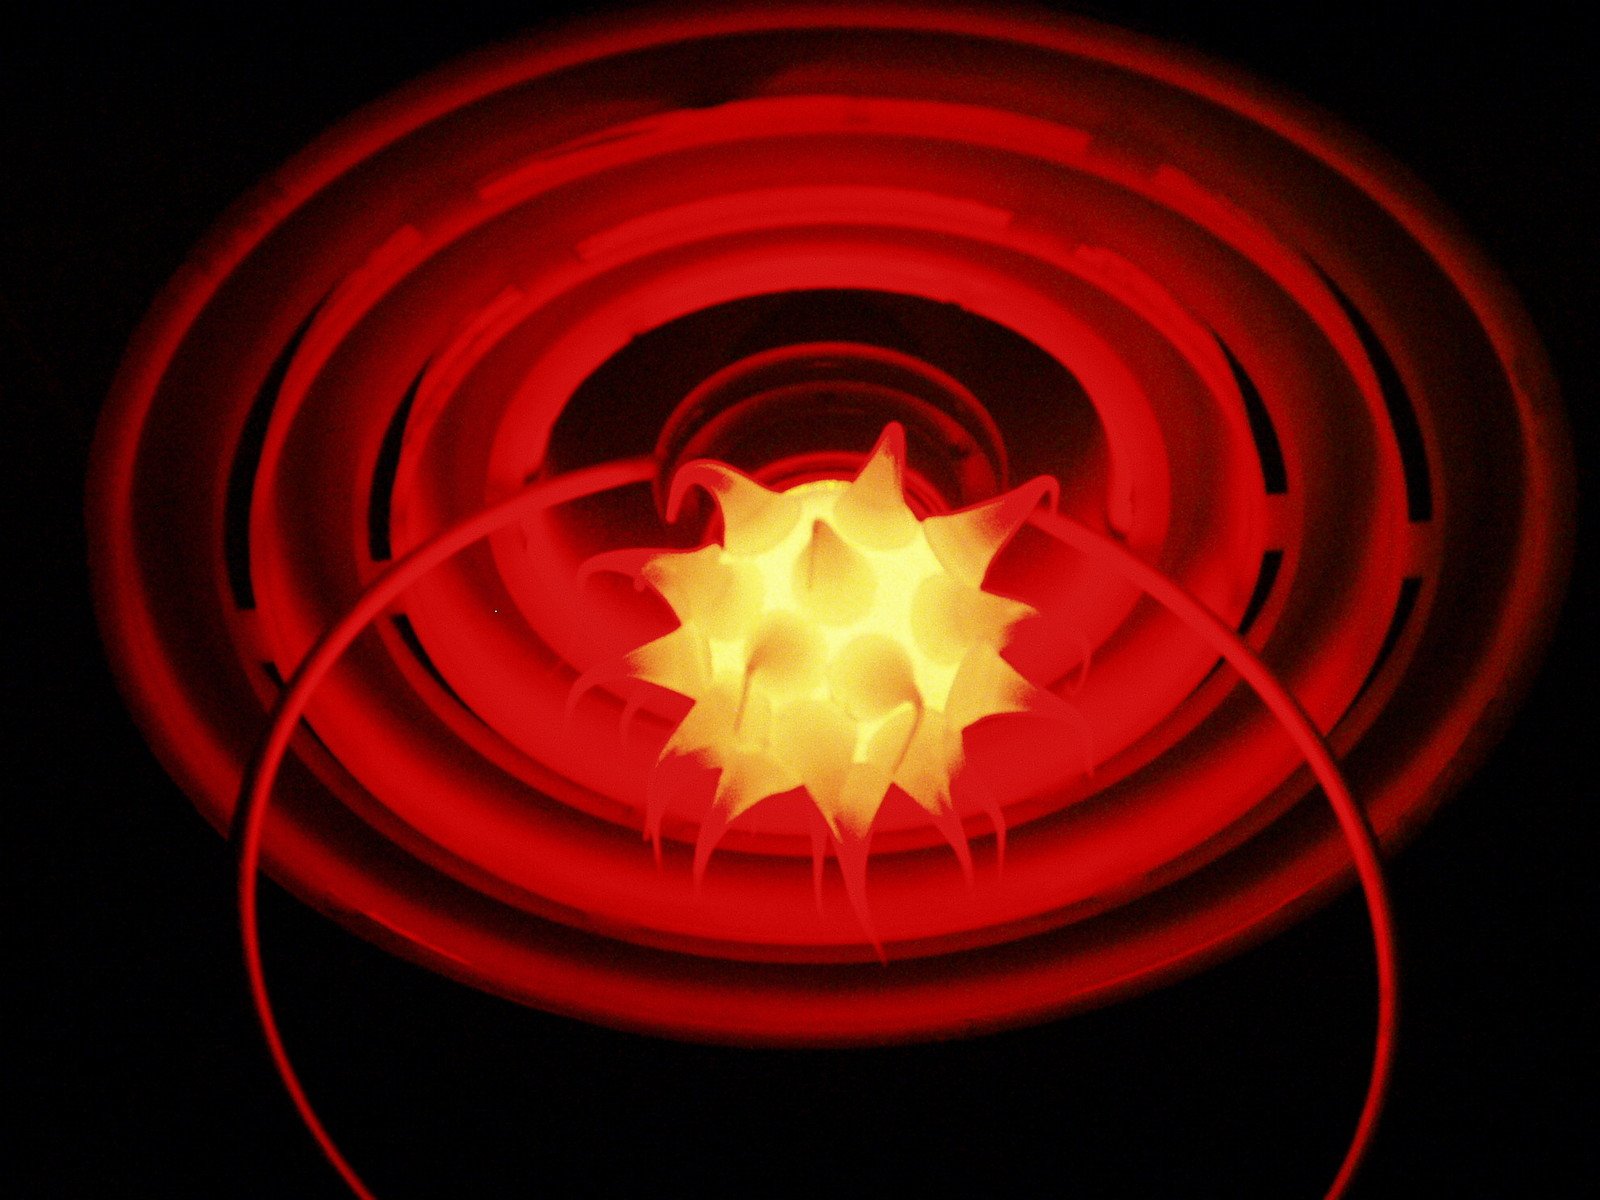 a red glowing object is against a black background